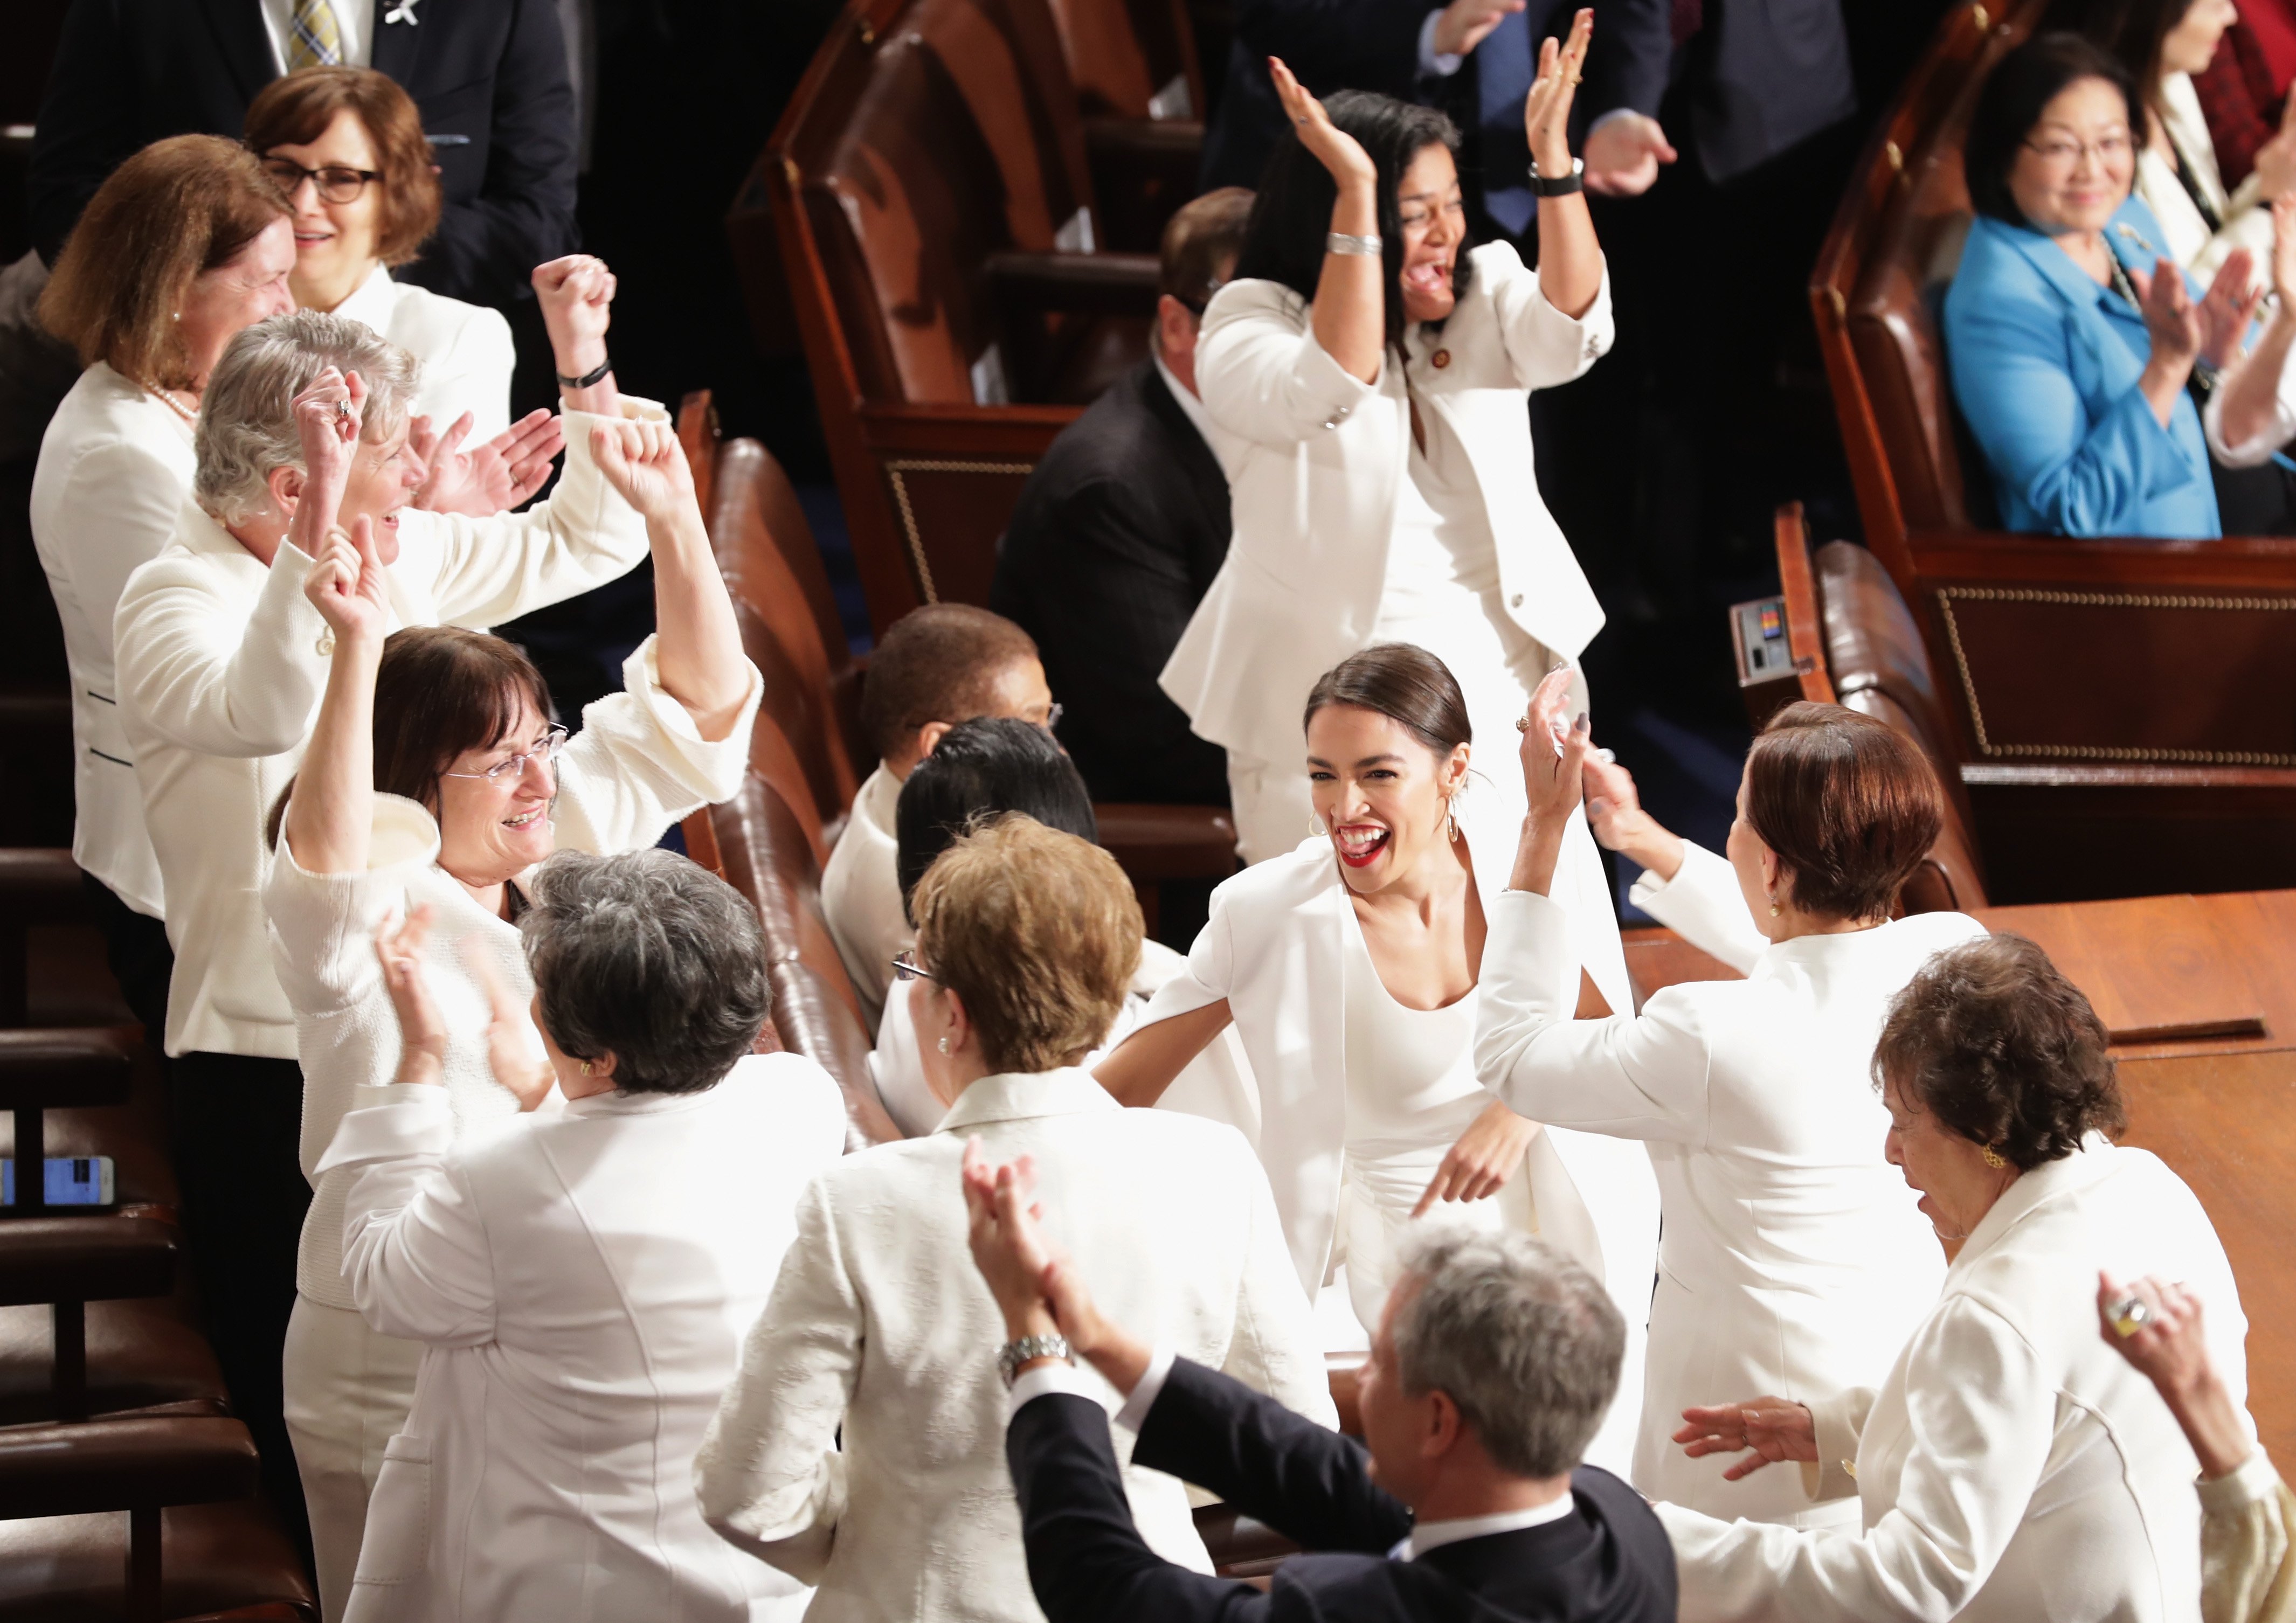 Alexandria Ocasio-Cortez at the State of the Union Speech in February 2019 | Photo: Getty Images